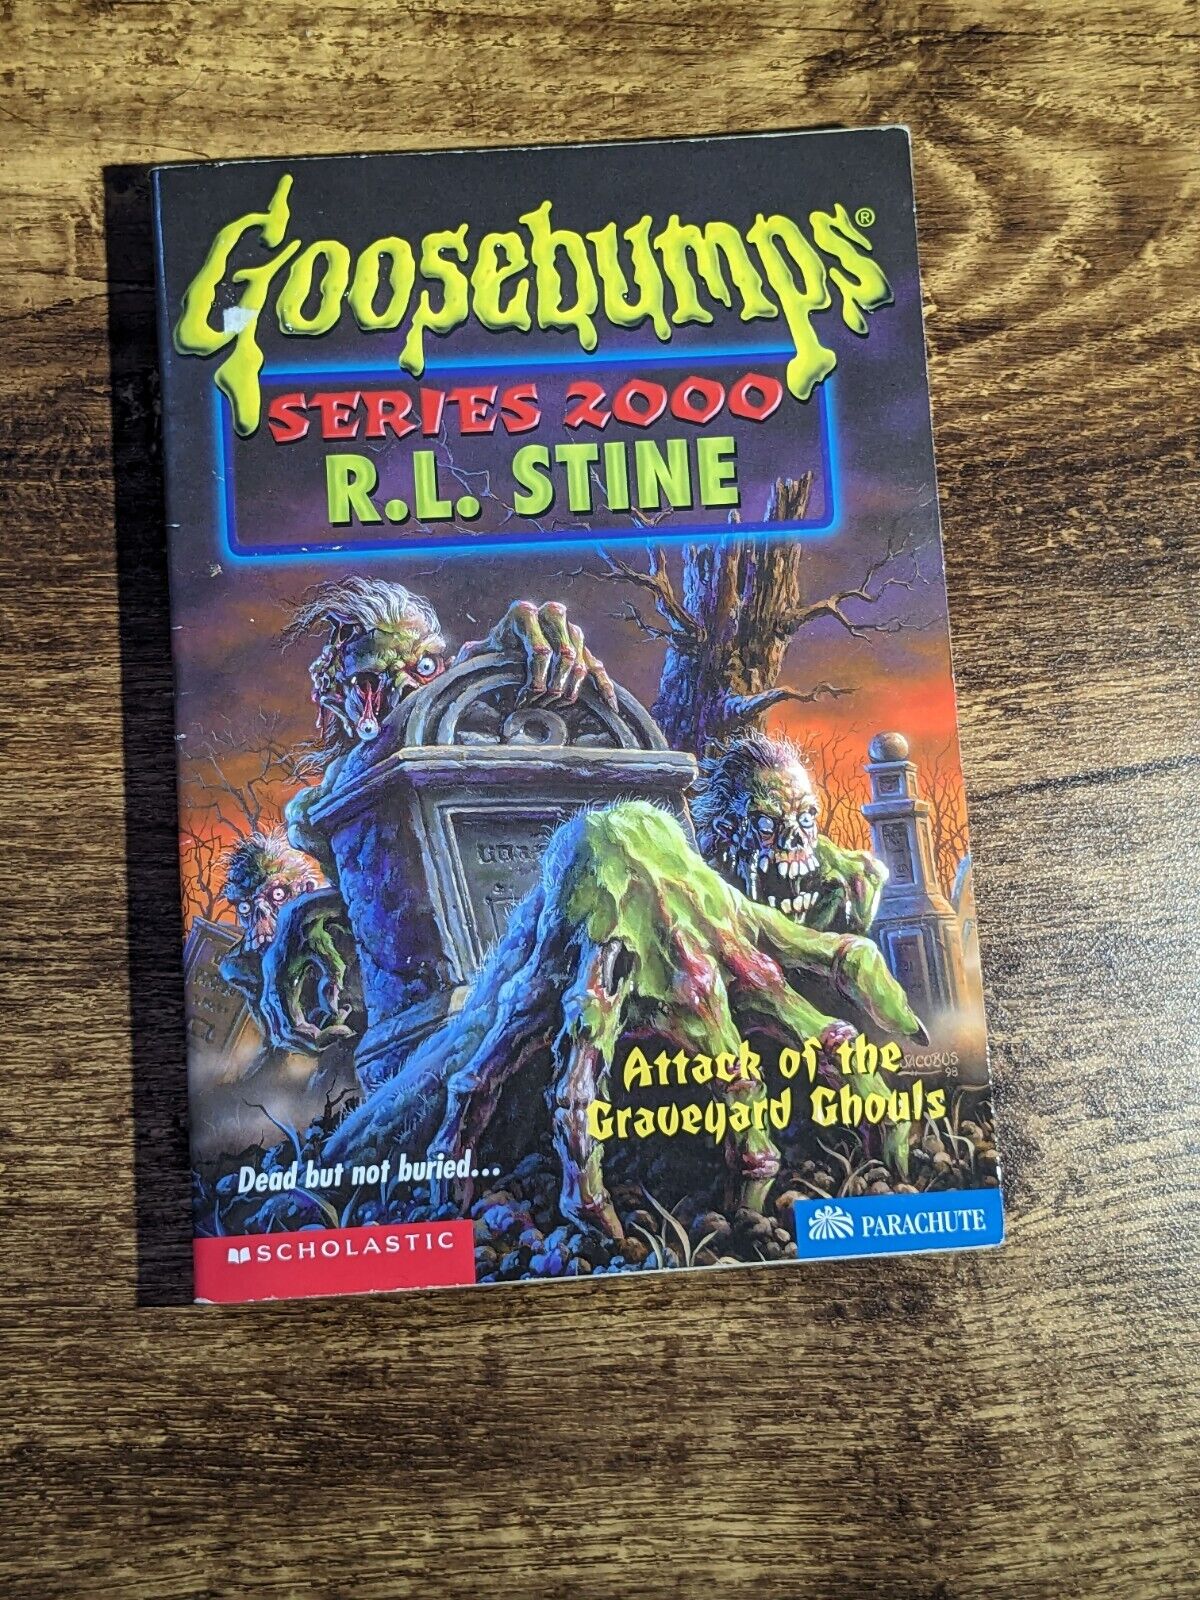 Attack of the Graveyard Ghouls (Goosebumps Series 2000 #11) by R.L. Stine - Asylum Books